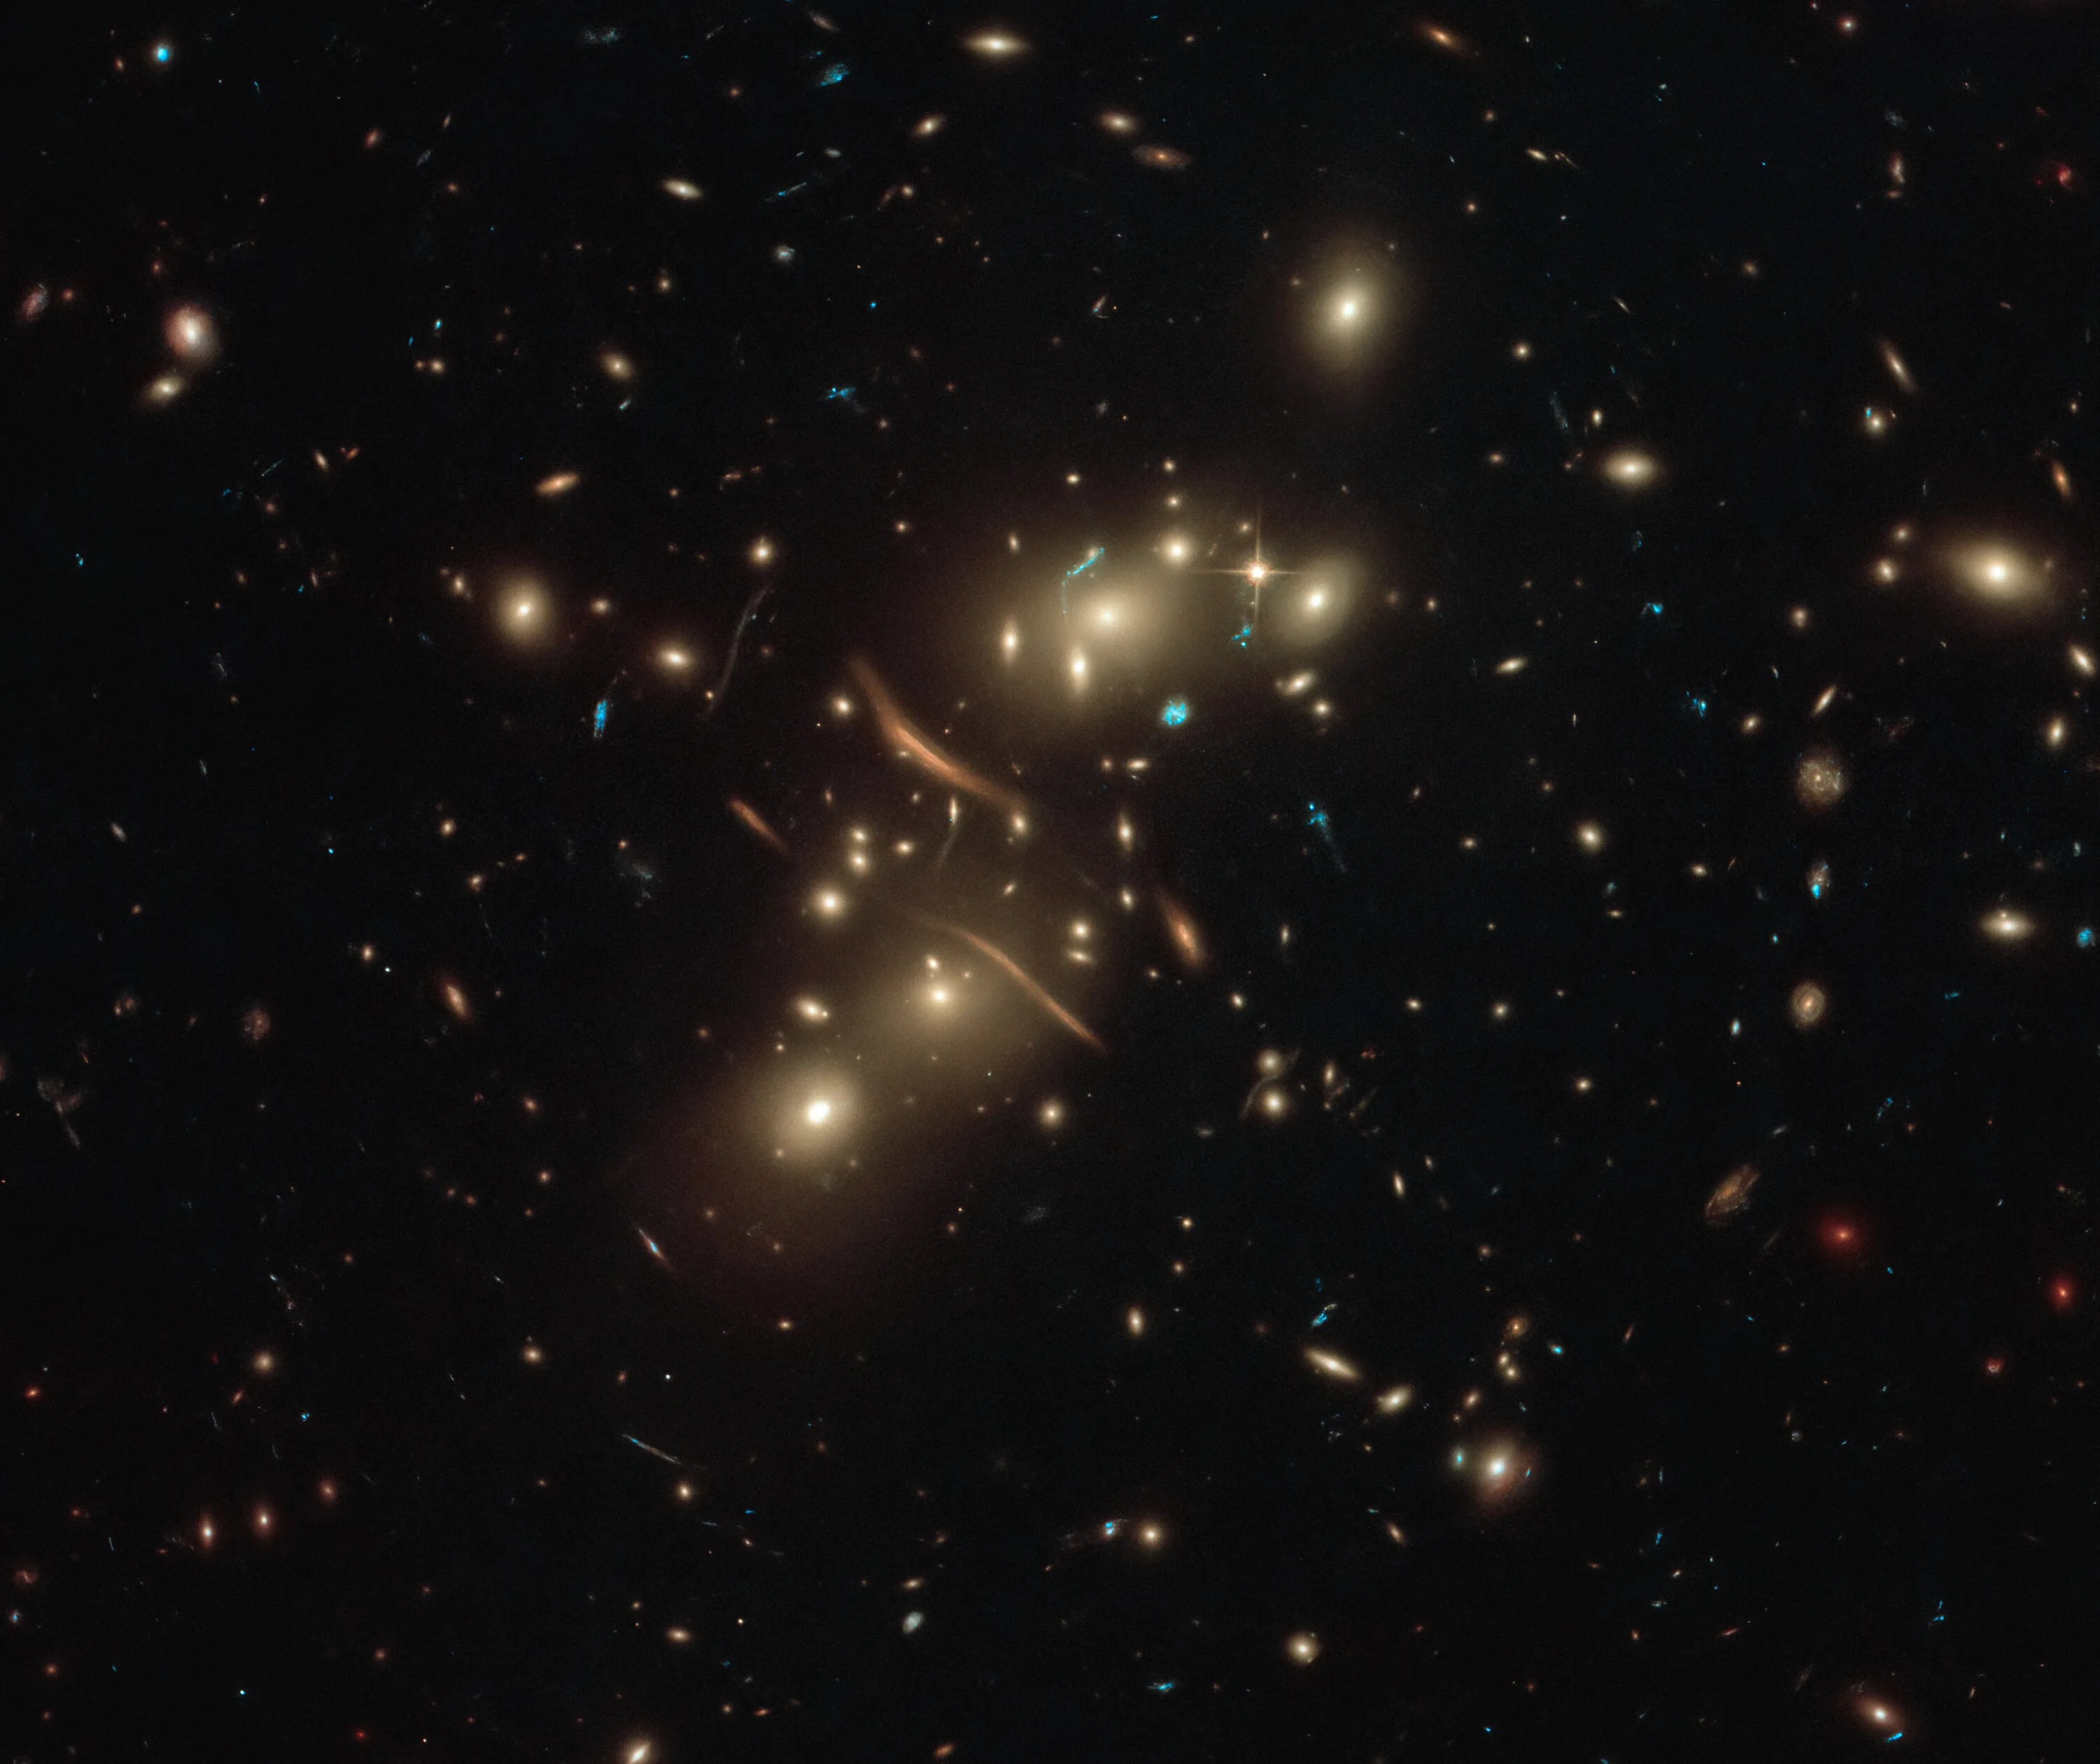 Hubble image of galaxy cluster abell 2813 (also known as aco 2813)